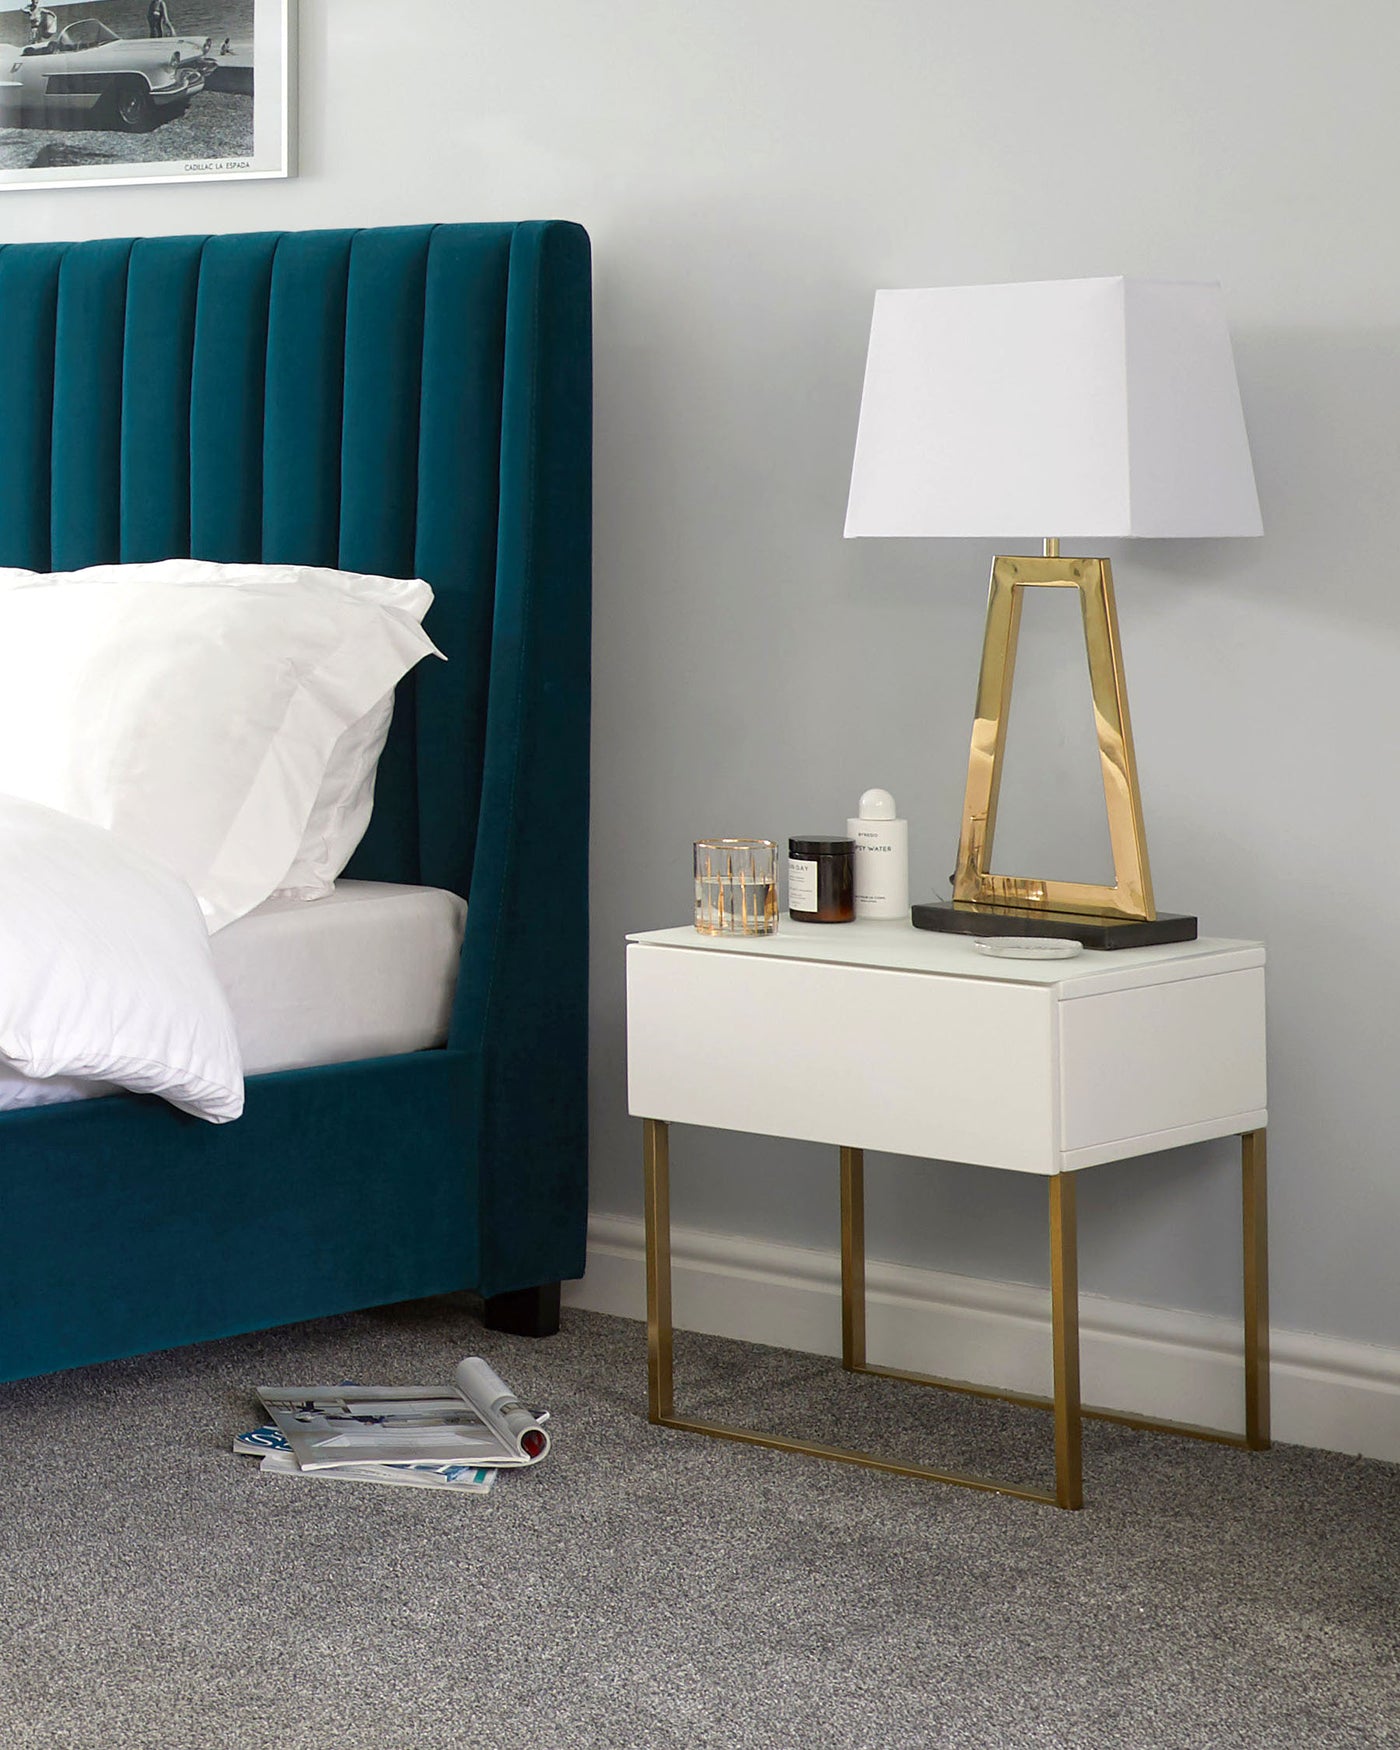 Contemporary bedroom furniture featuring a teal upholstered tall headboard with vertical channel tufting, and a modern white bedside table with a smooth finish and brass legs. The table is adorned with a geometric brass table lamp with a white shade, alongside a neatly arranged selection of cosmetics and books.